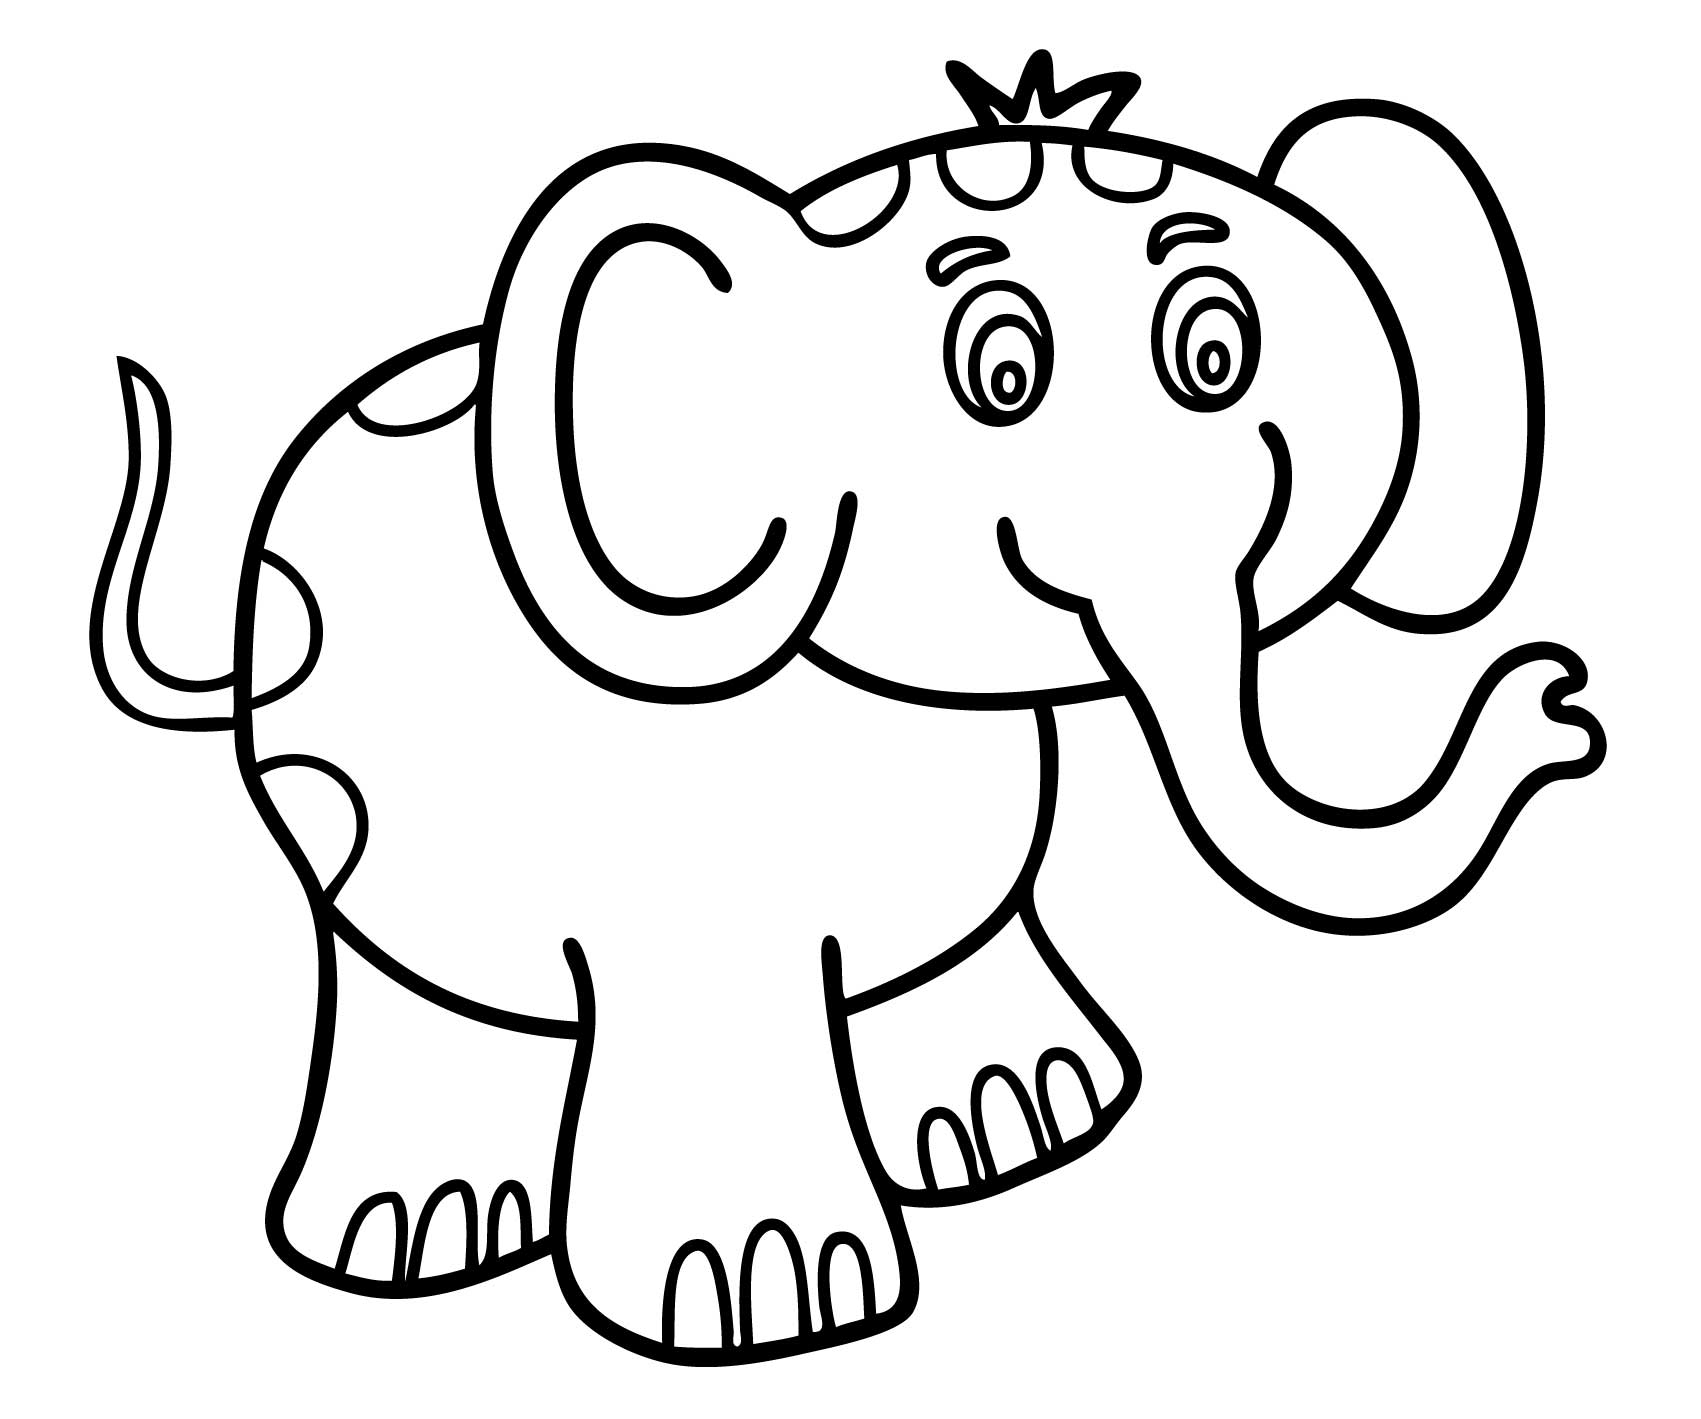 Easy Coloring Pages For Kids At GetColorings Free Printable Colorings Pages To Print And Color